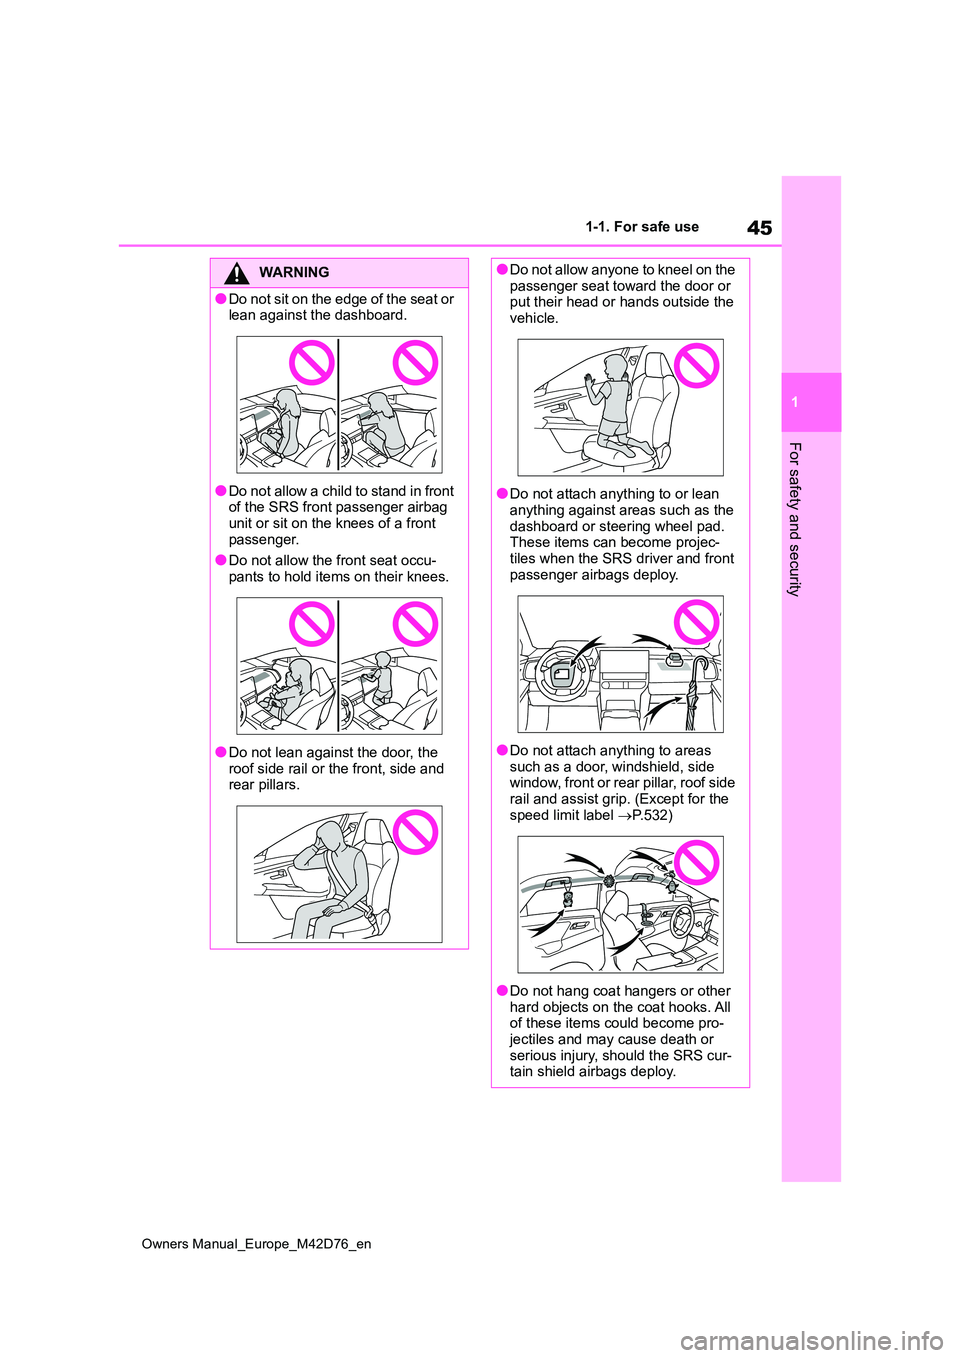 TOYOTA BZ4X 2022  Owners Manual (in English) 45
1
Owners Manual_Europe_M42D76_en
1-1. For safe use
For safety and security
WARNING
●Do not sit on the edge of the seat or  lean against the dashboard.
●Do not allow a child to stand in front of